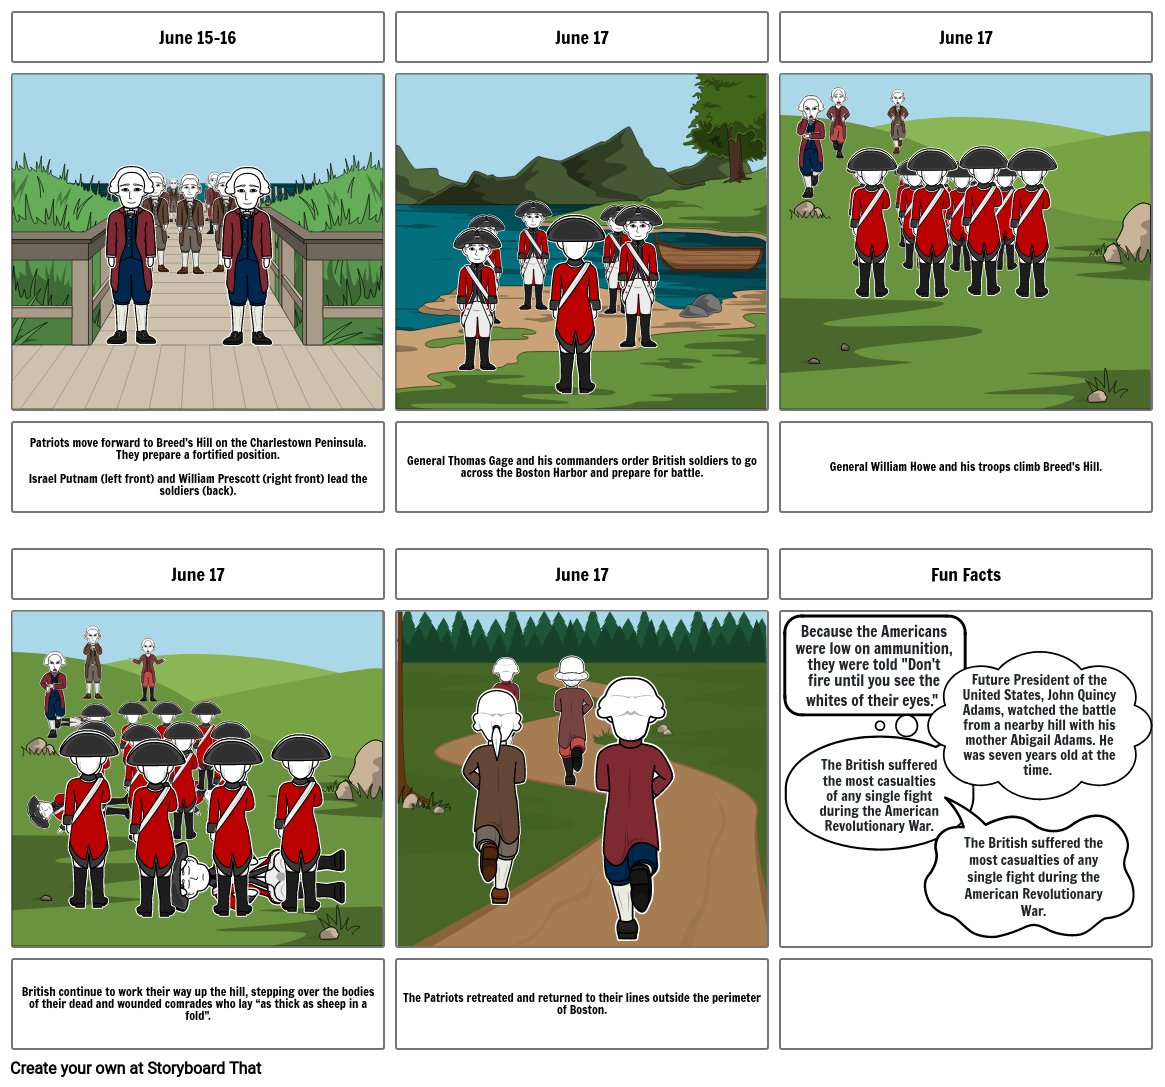 The Battle of Bunker Hill (Breed's Hill) Storyboard